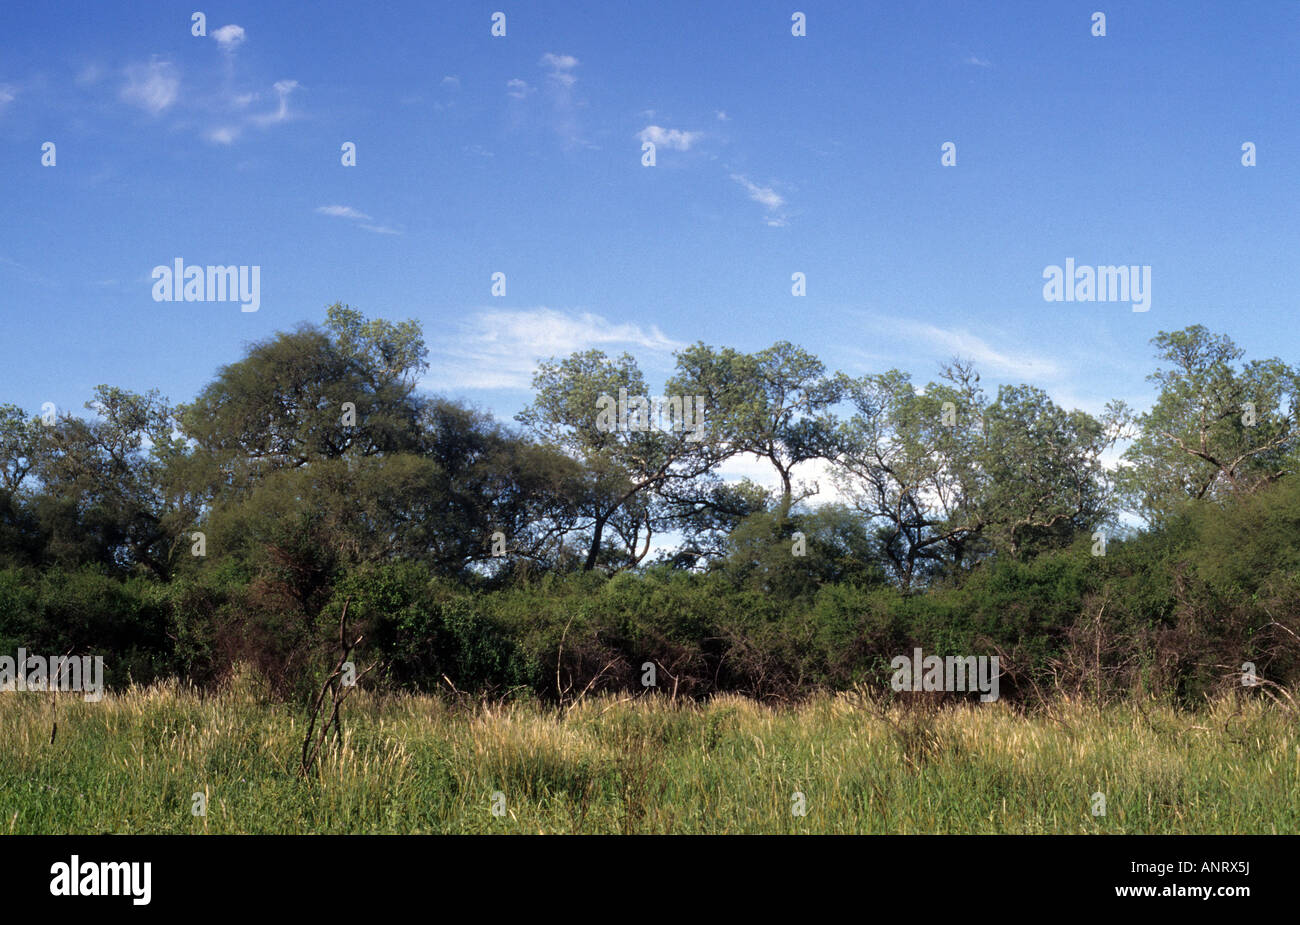 A view of the Transitional Forest with quebracho trees in the Chaco region, Formosa province, Argentina Stock Photo